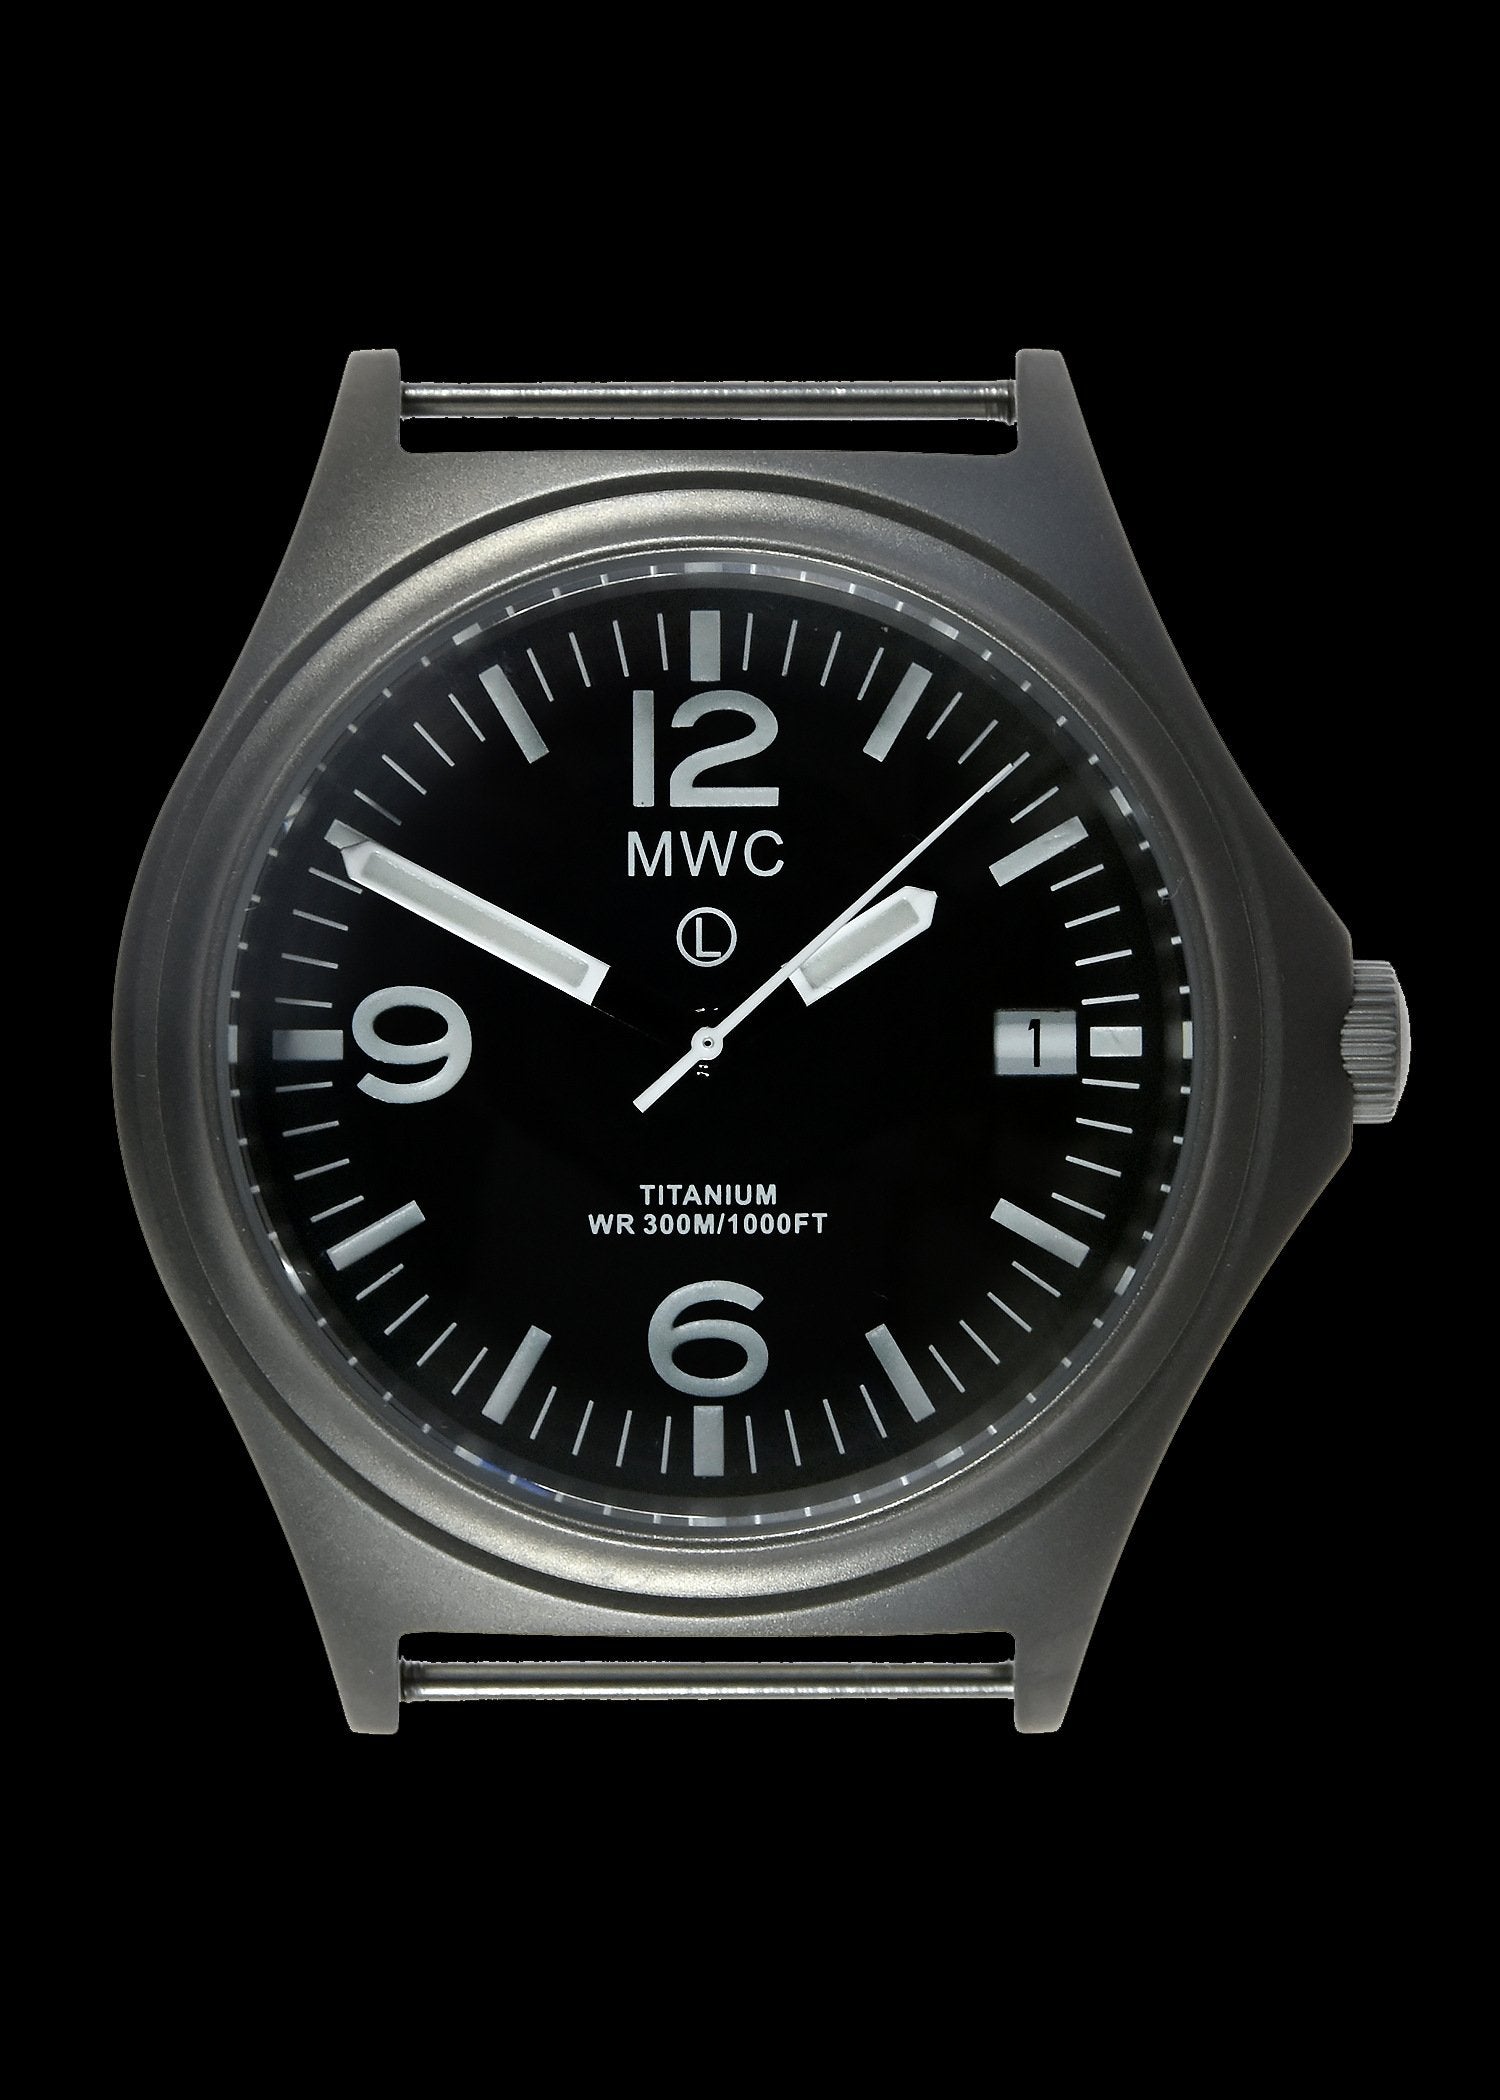 MWC 45th Anniversary Limited Edition Titanium Military Watch -300m Water with Luminova and Sapphire Crystal